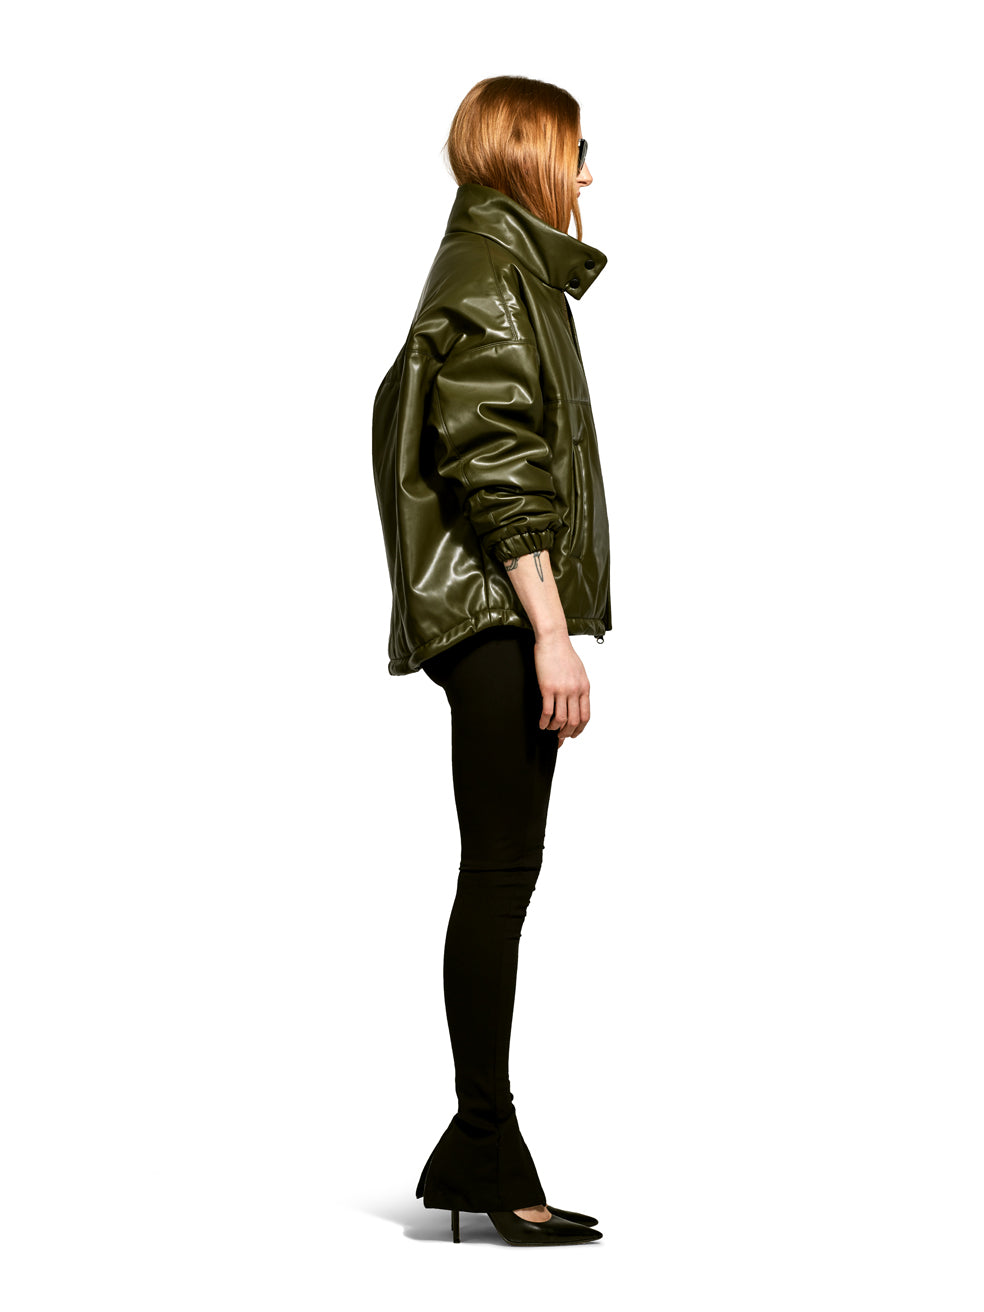 Billy Olive Green Vegan Leather Jacket Slow Fashion Outerwear Cropped Bomber Coat